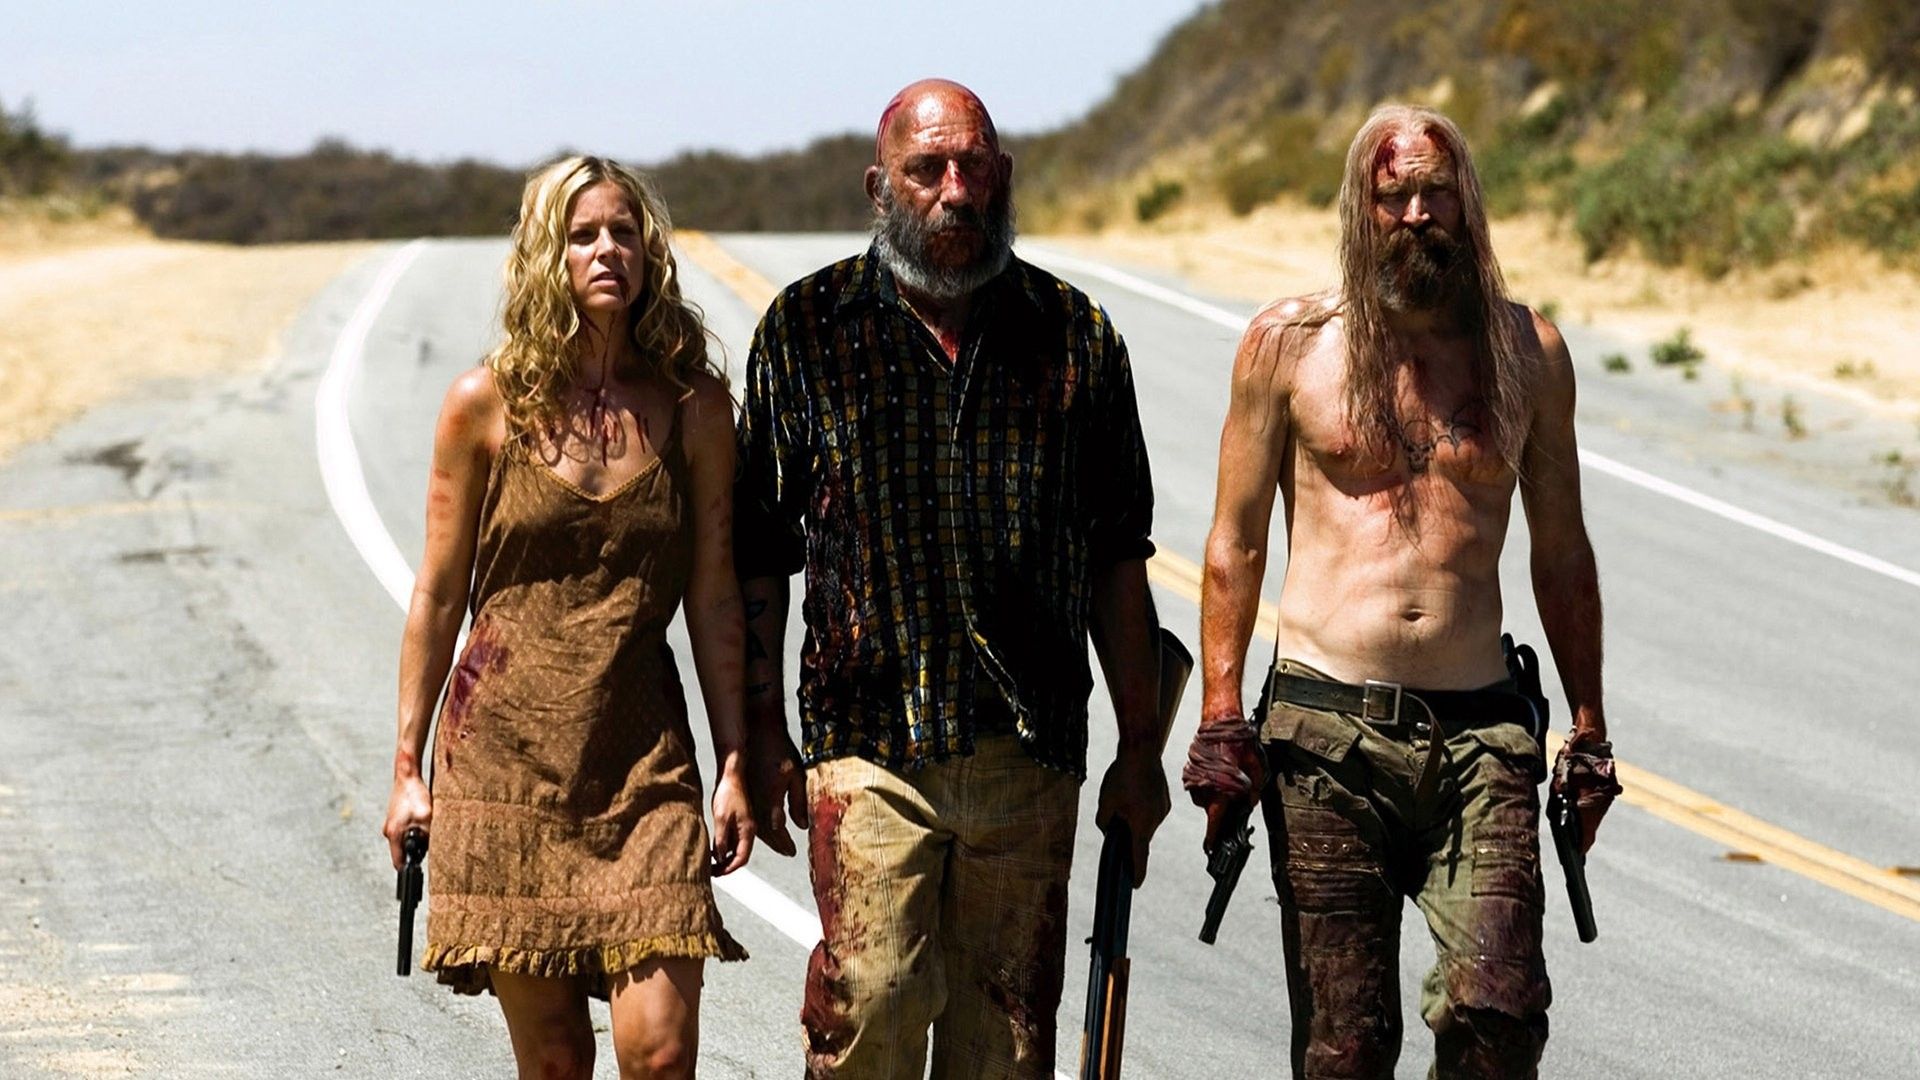 The Devil's Rejects background